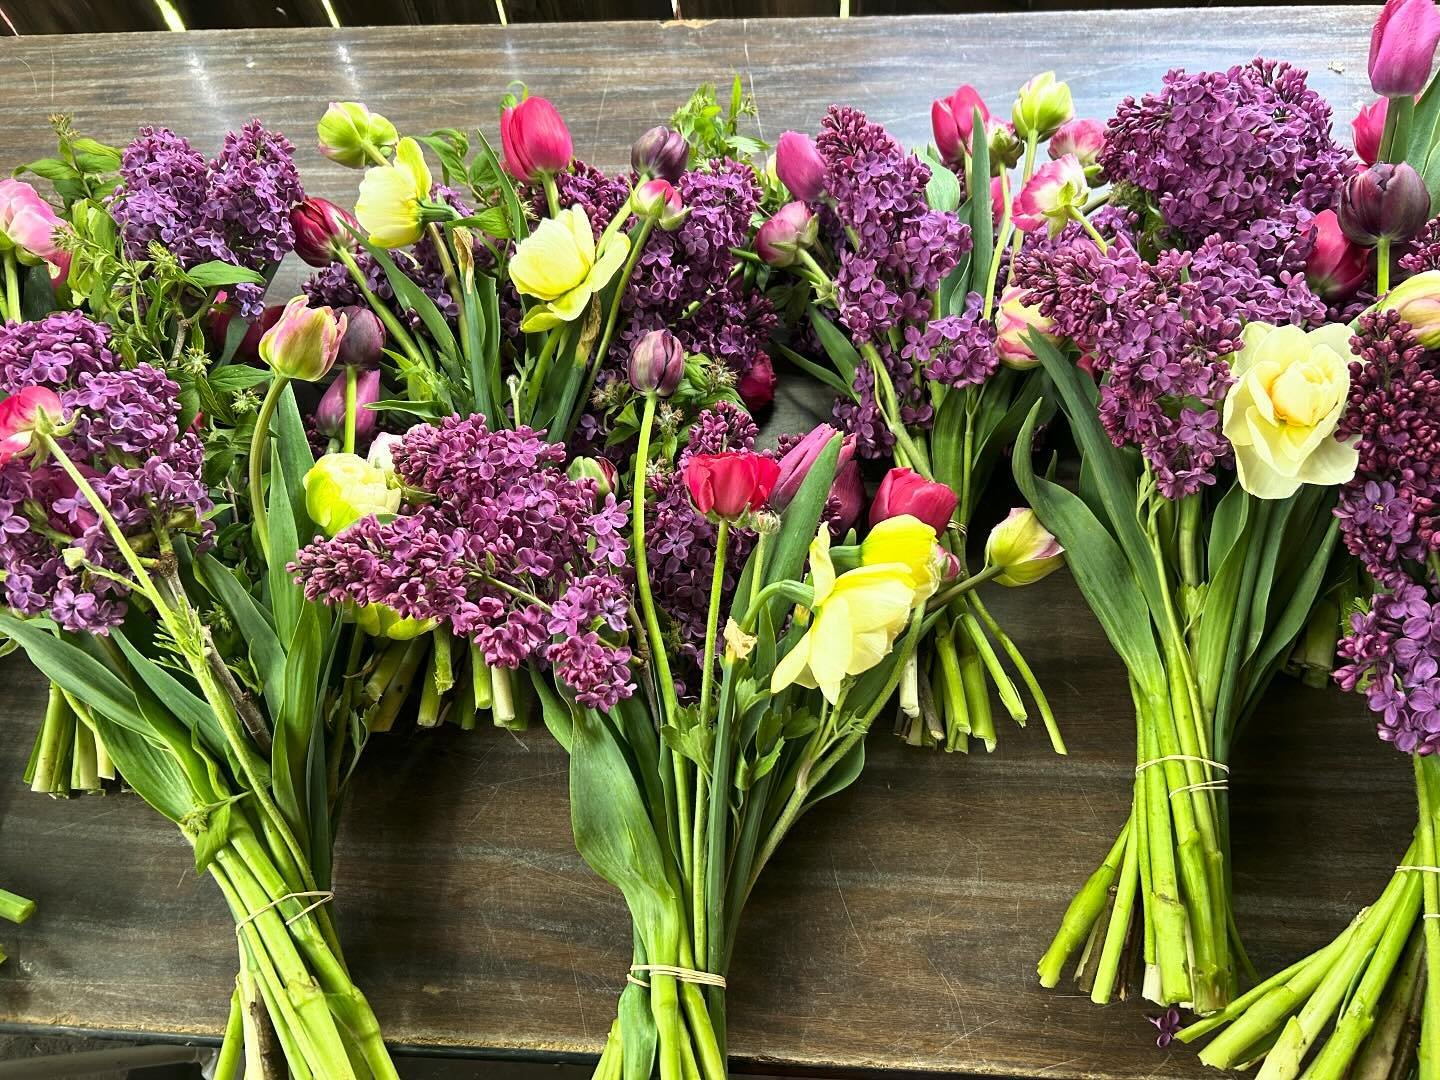 Mother&rsquo;s Day pre-orders for Saturday pick up are out on the stand now! I had so much fun making these and appreciate every single order more than you know.

Every last Tulip is out on the stand this morning.

🌸$25 Tulip Bouquets &amp; a few $4